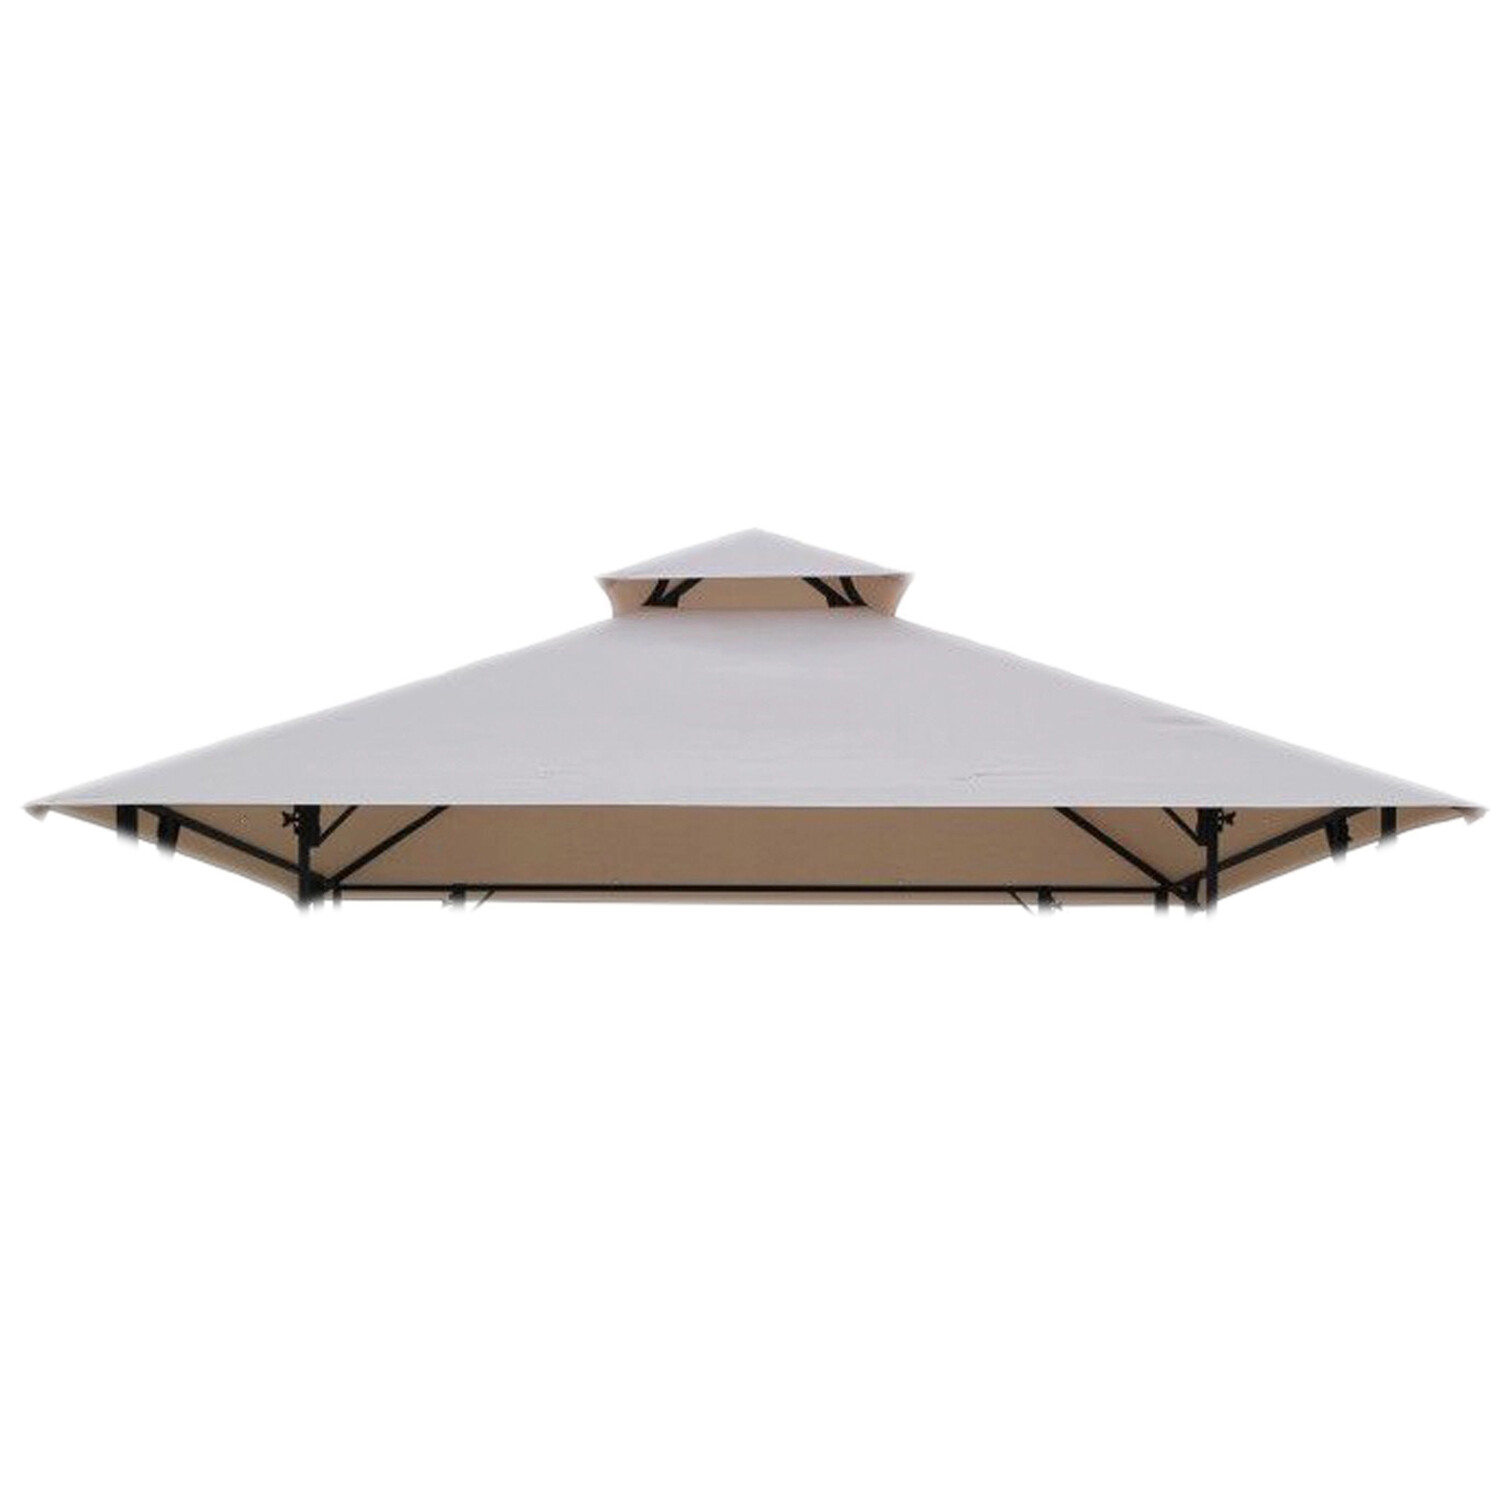 Athens 3 x 3m Gazebo Canopy Replacement Image 3